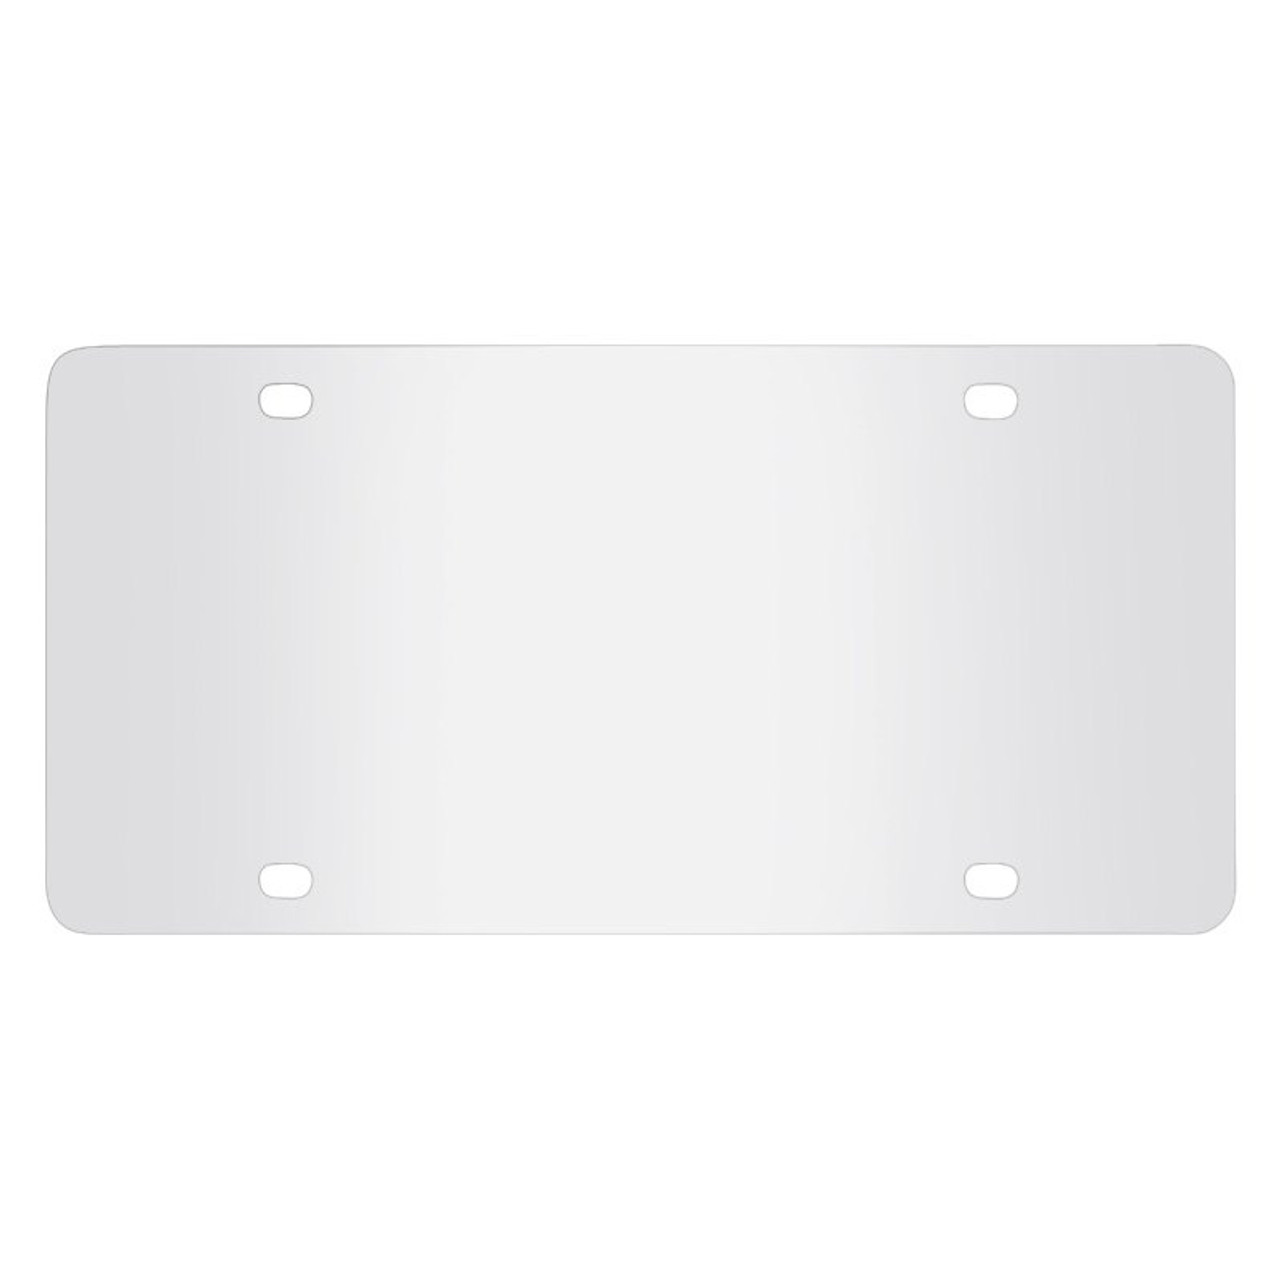 Plastic License Plate/Frame Protector